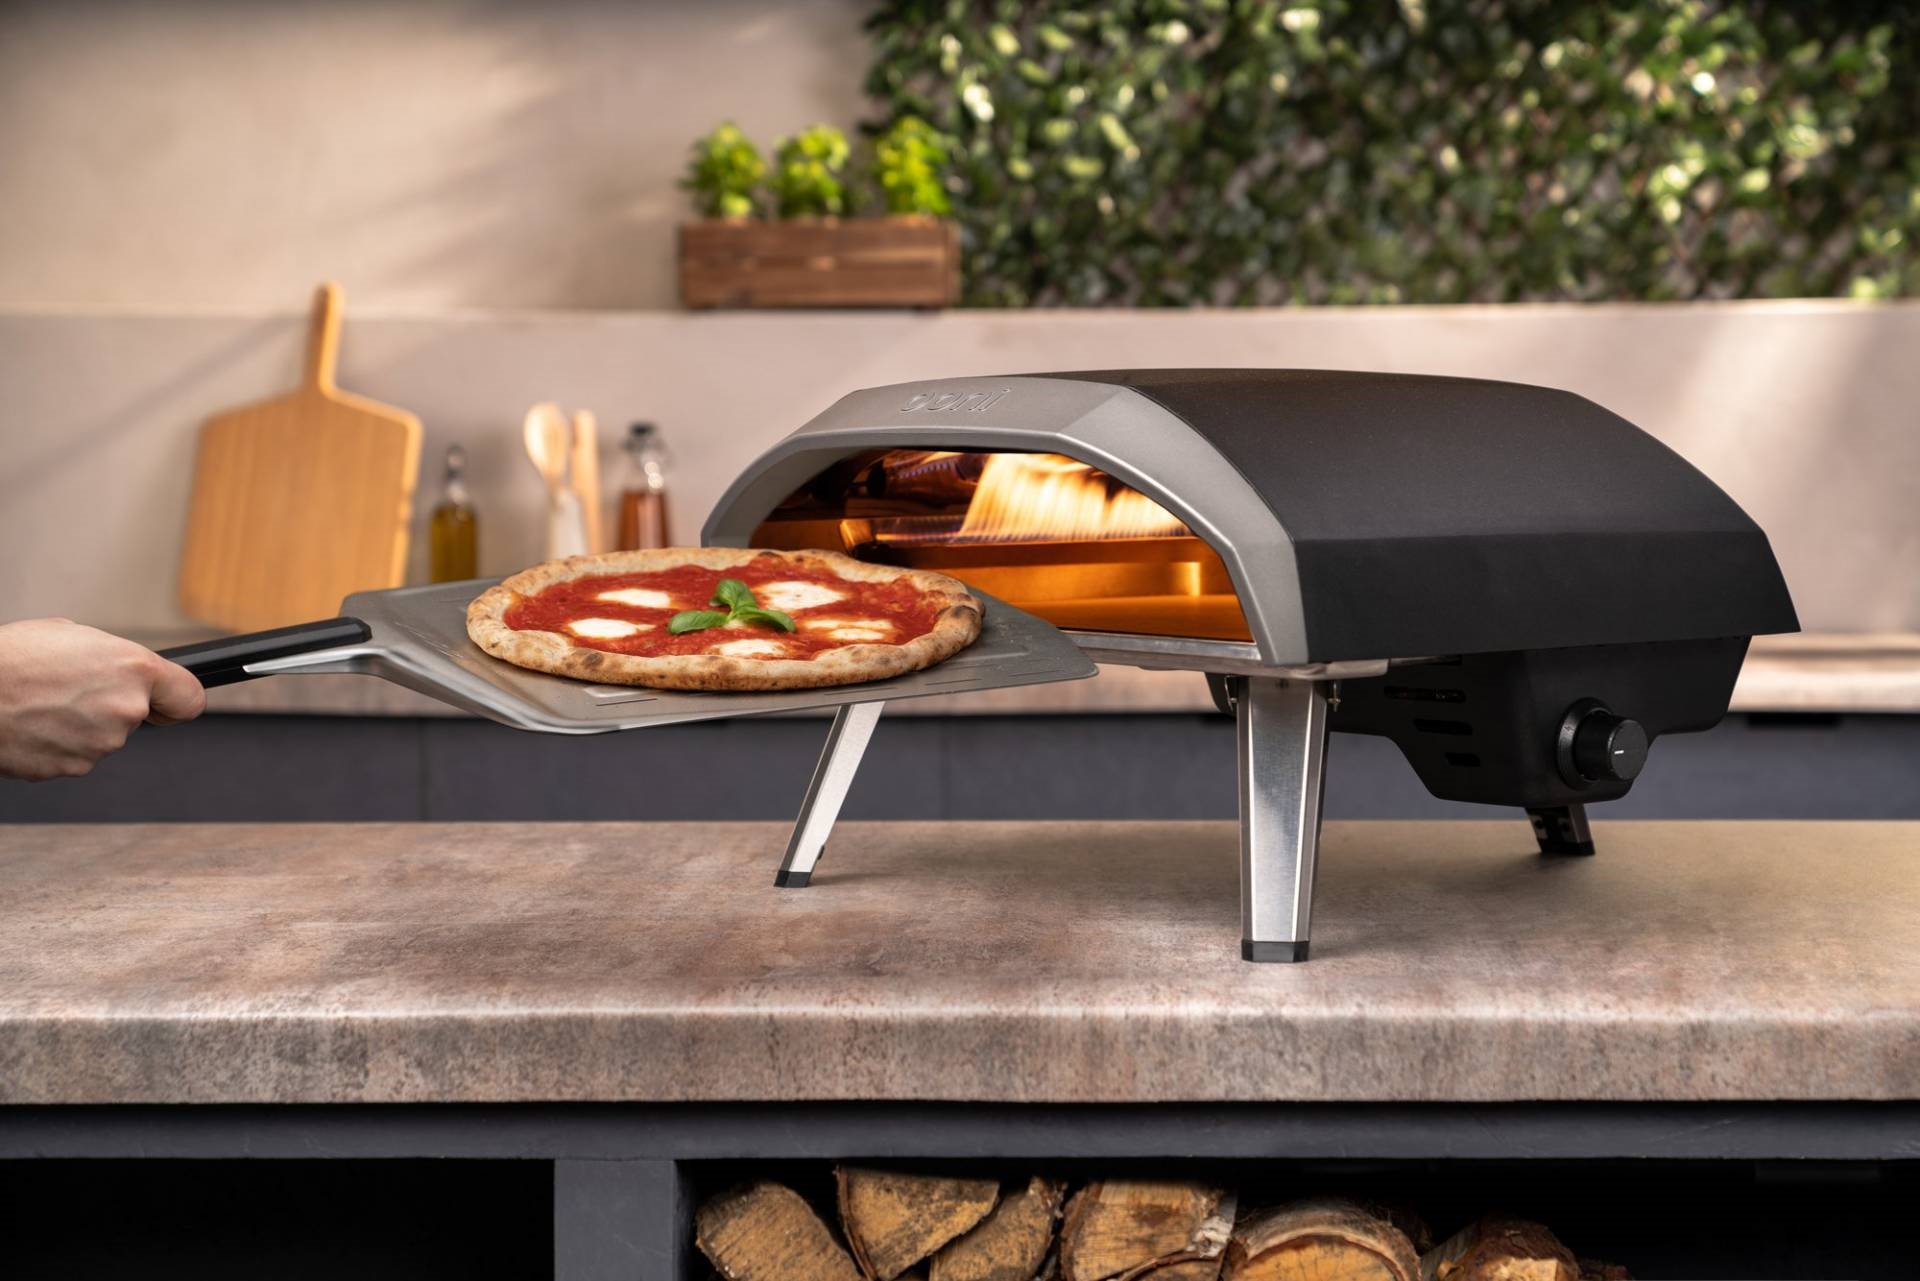 Ooni Koda Pizza Oven: Restaurant-Quality Pizza at Home | DeviceDaily.com